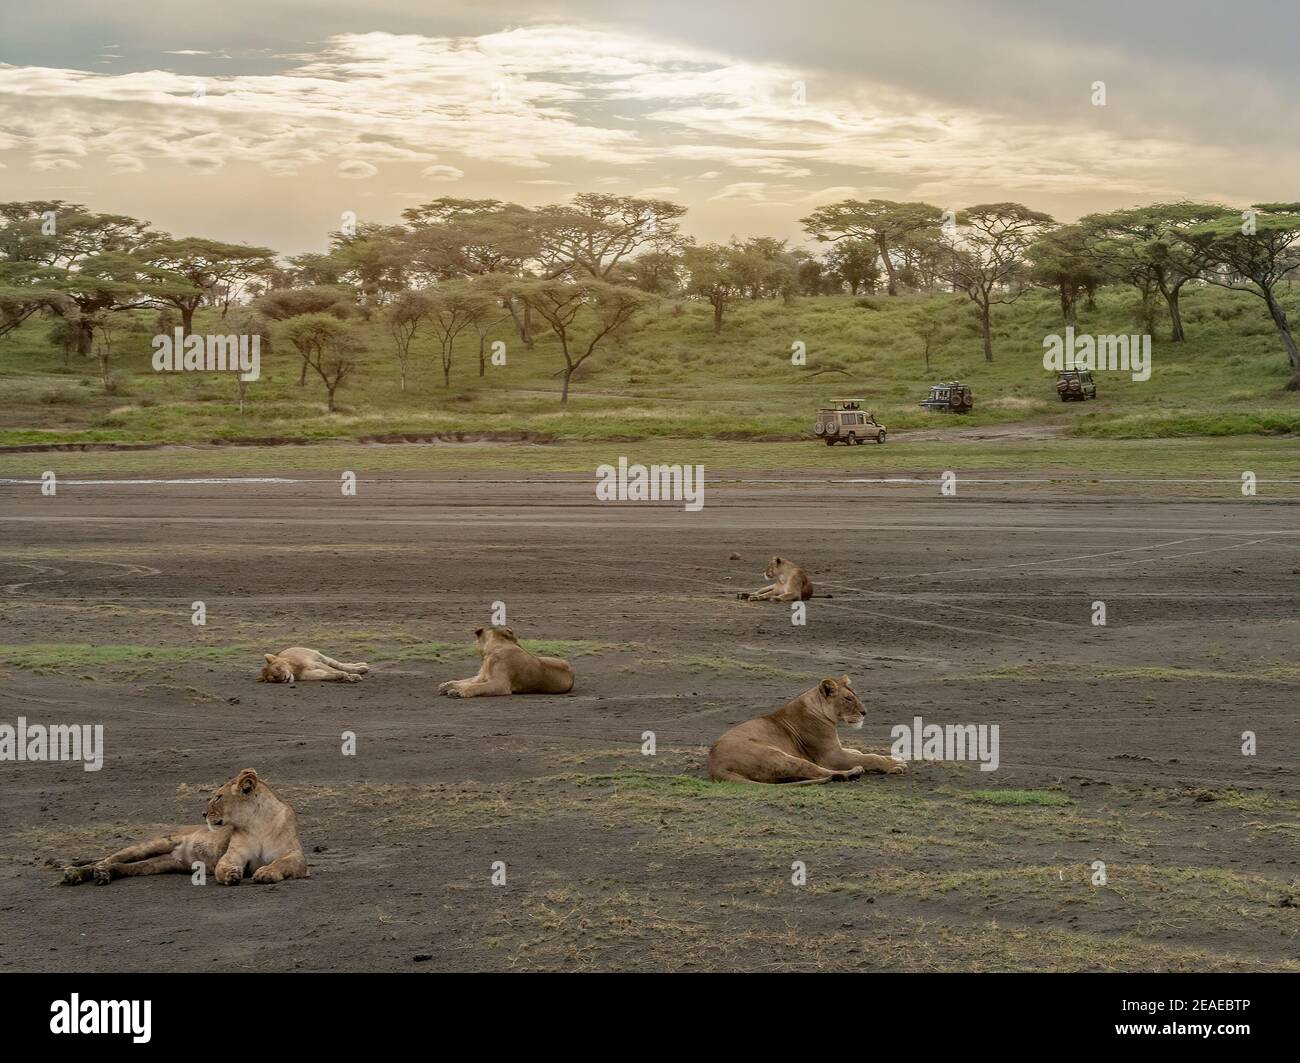 A pride of lions resting on the african savanna. Stock Photo